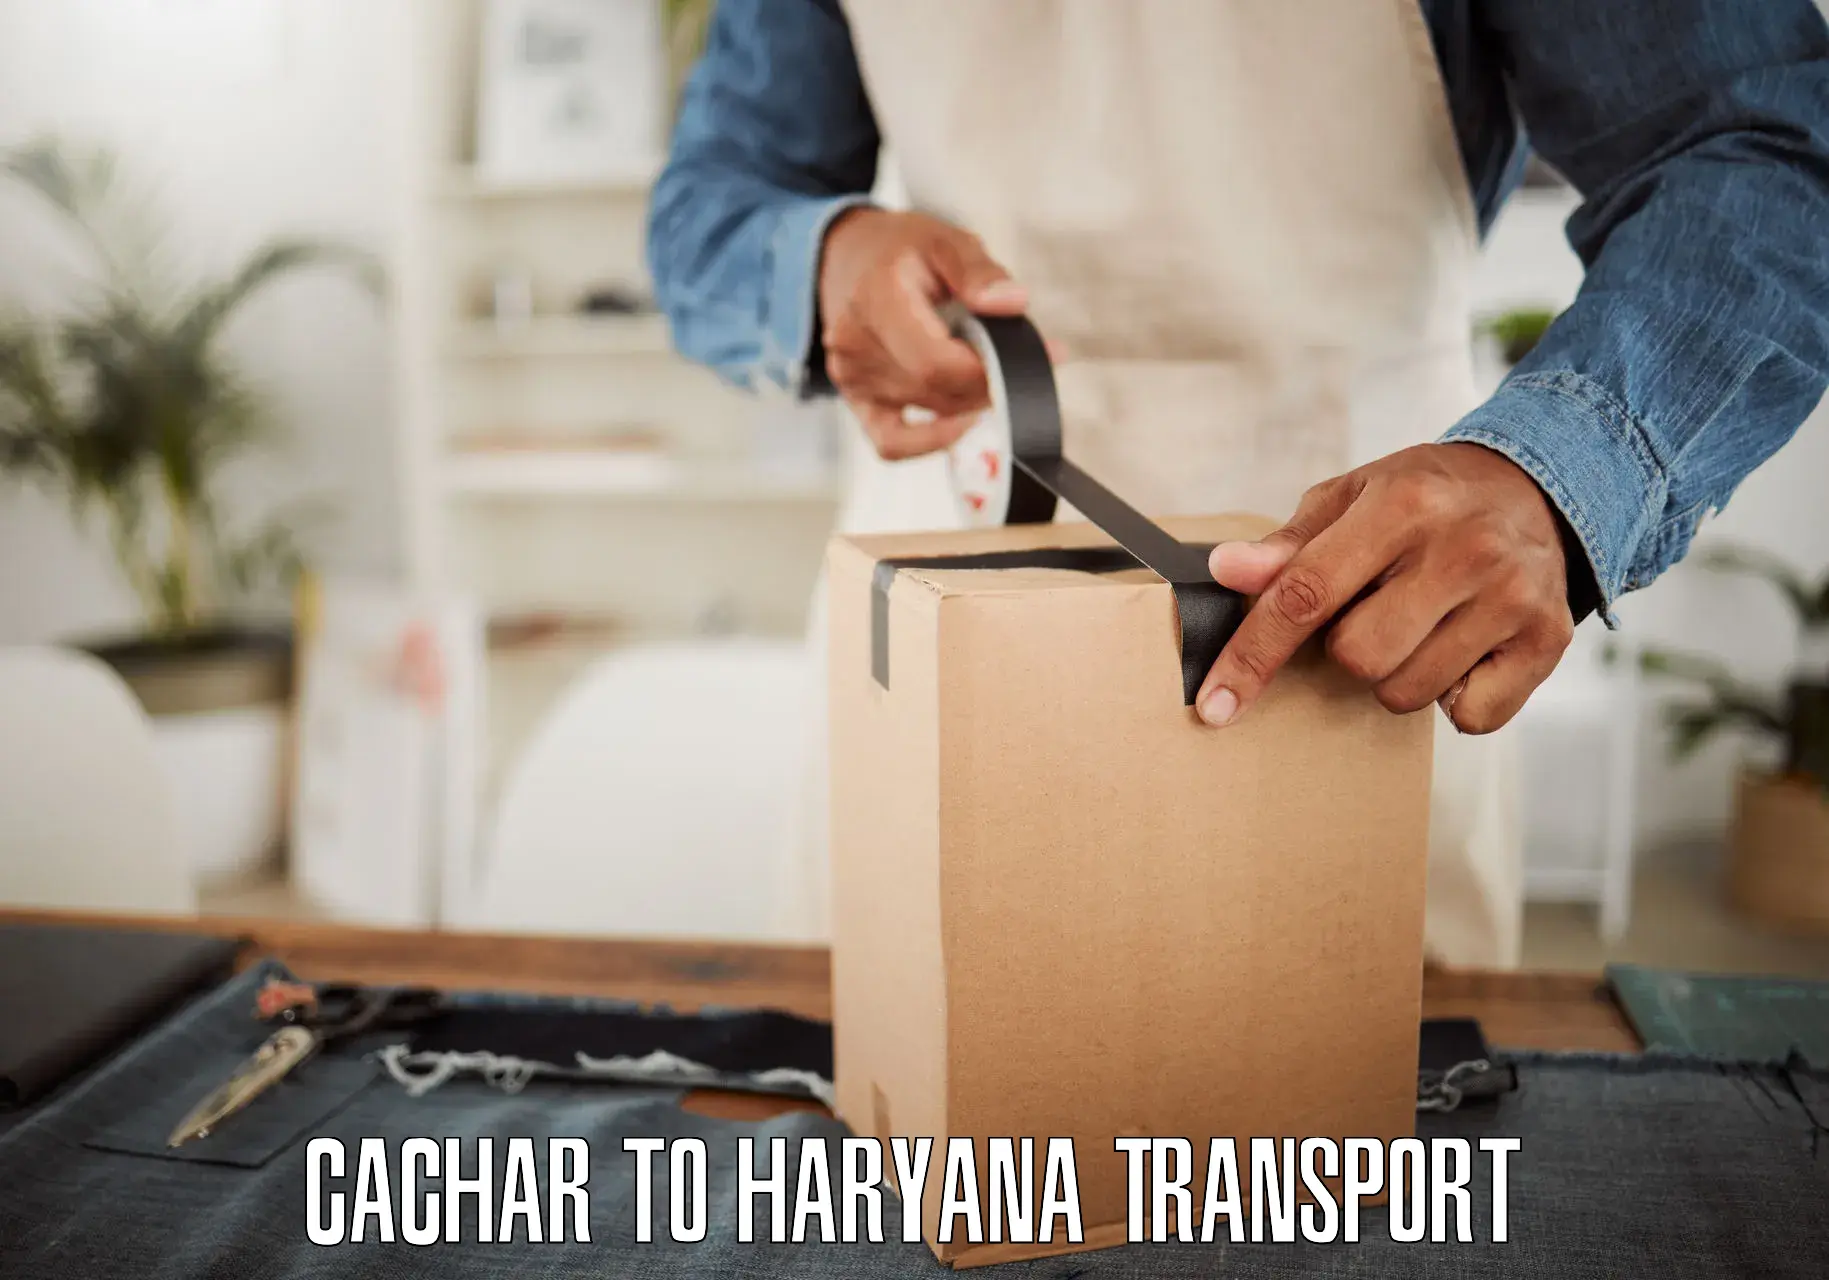 Daily transport service Cachar to NCR Haryana